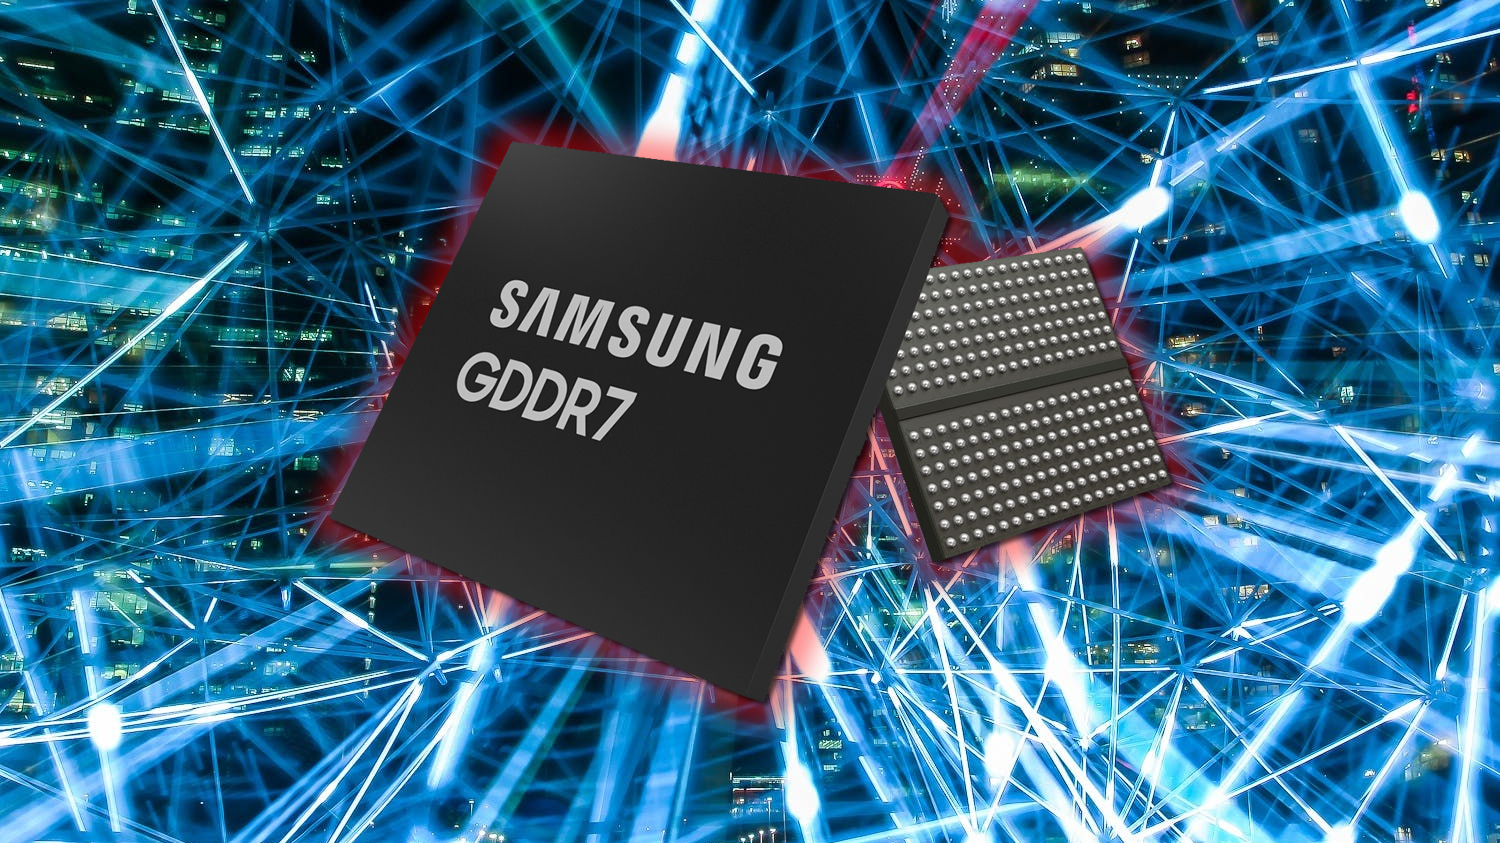 JEDEC unveils next-generation GDDR7 memory with broad industry support